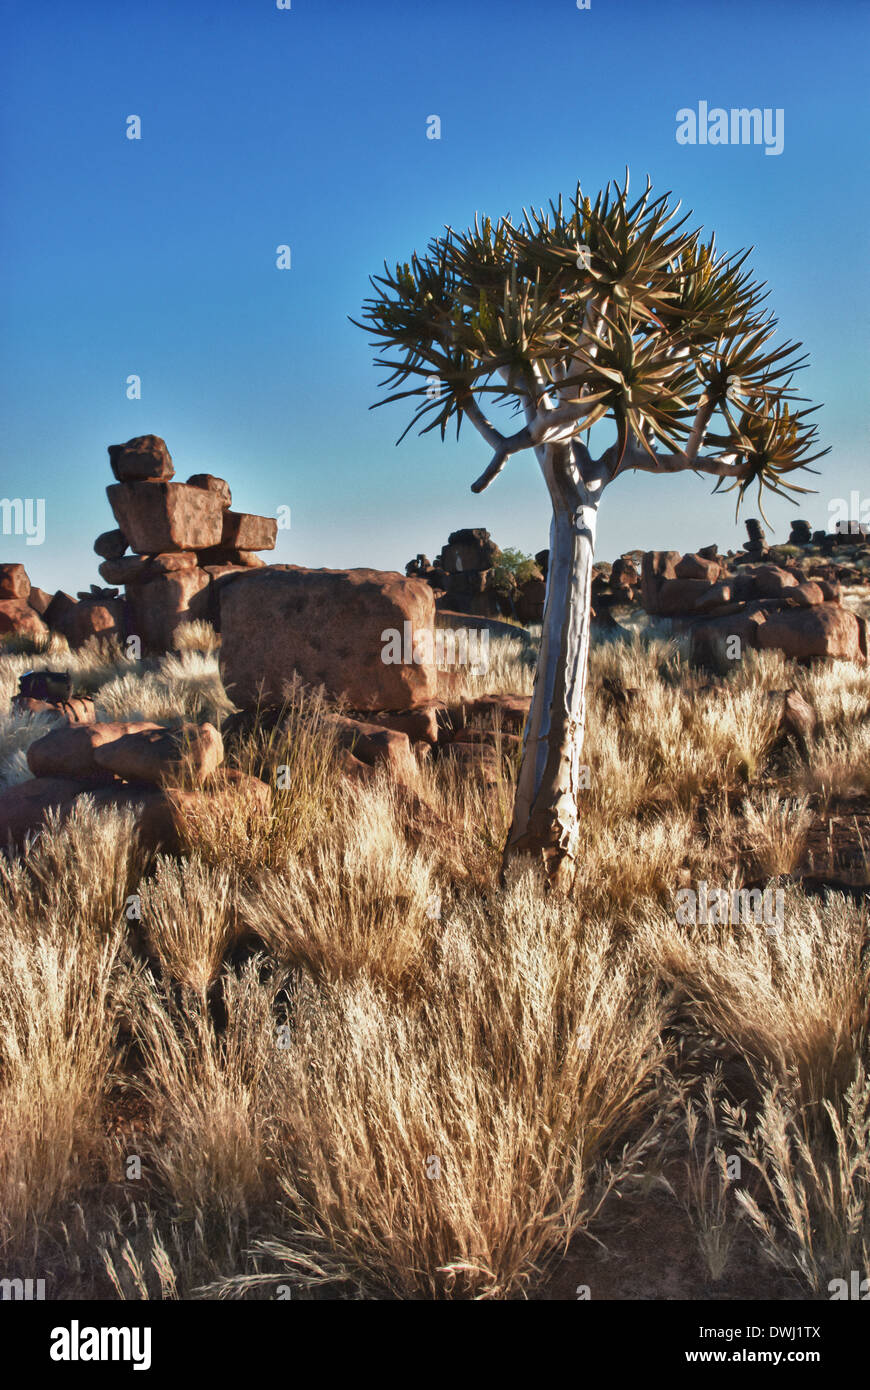 Quiver tree, Kokerboom, Aloe dichotoma, and dolerite boulders, Giant's Playground, Keetmannshoop, Namibia, West Africa Stock Photo